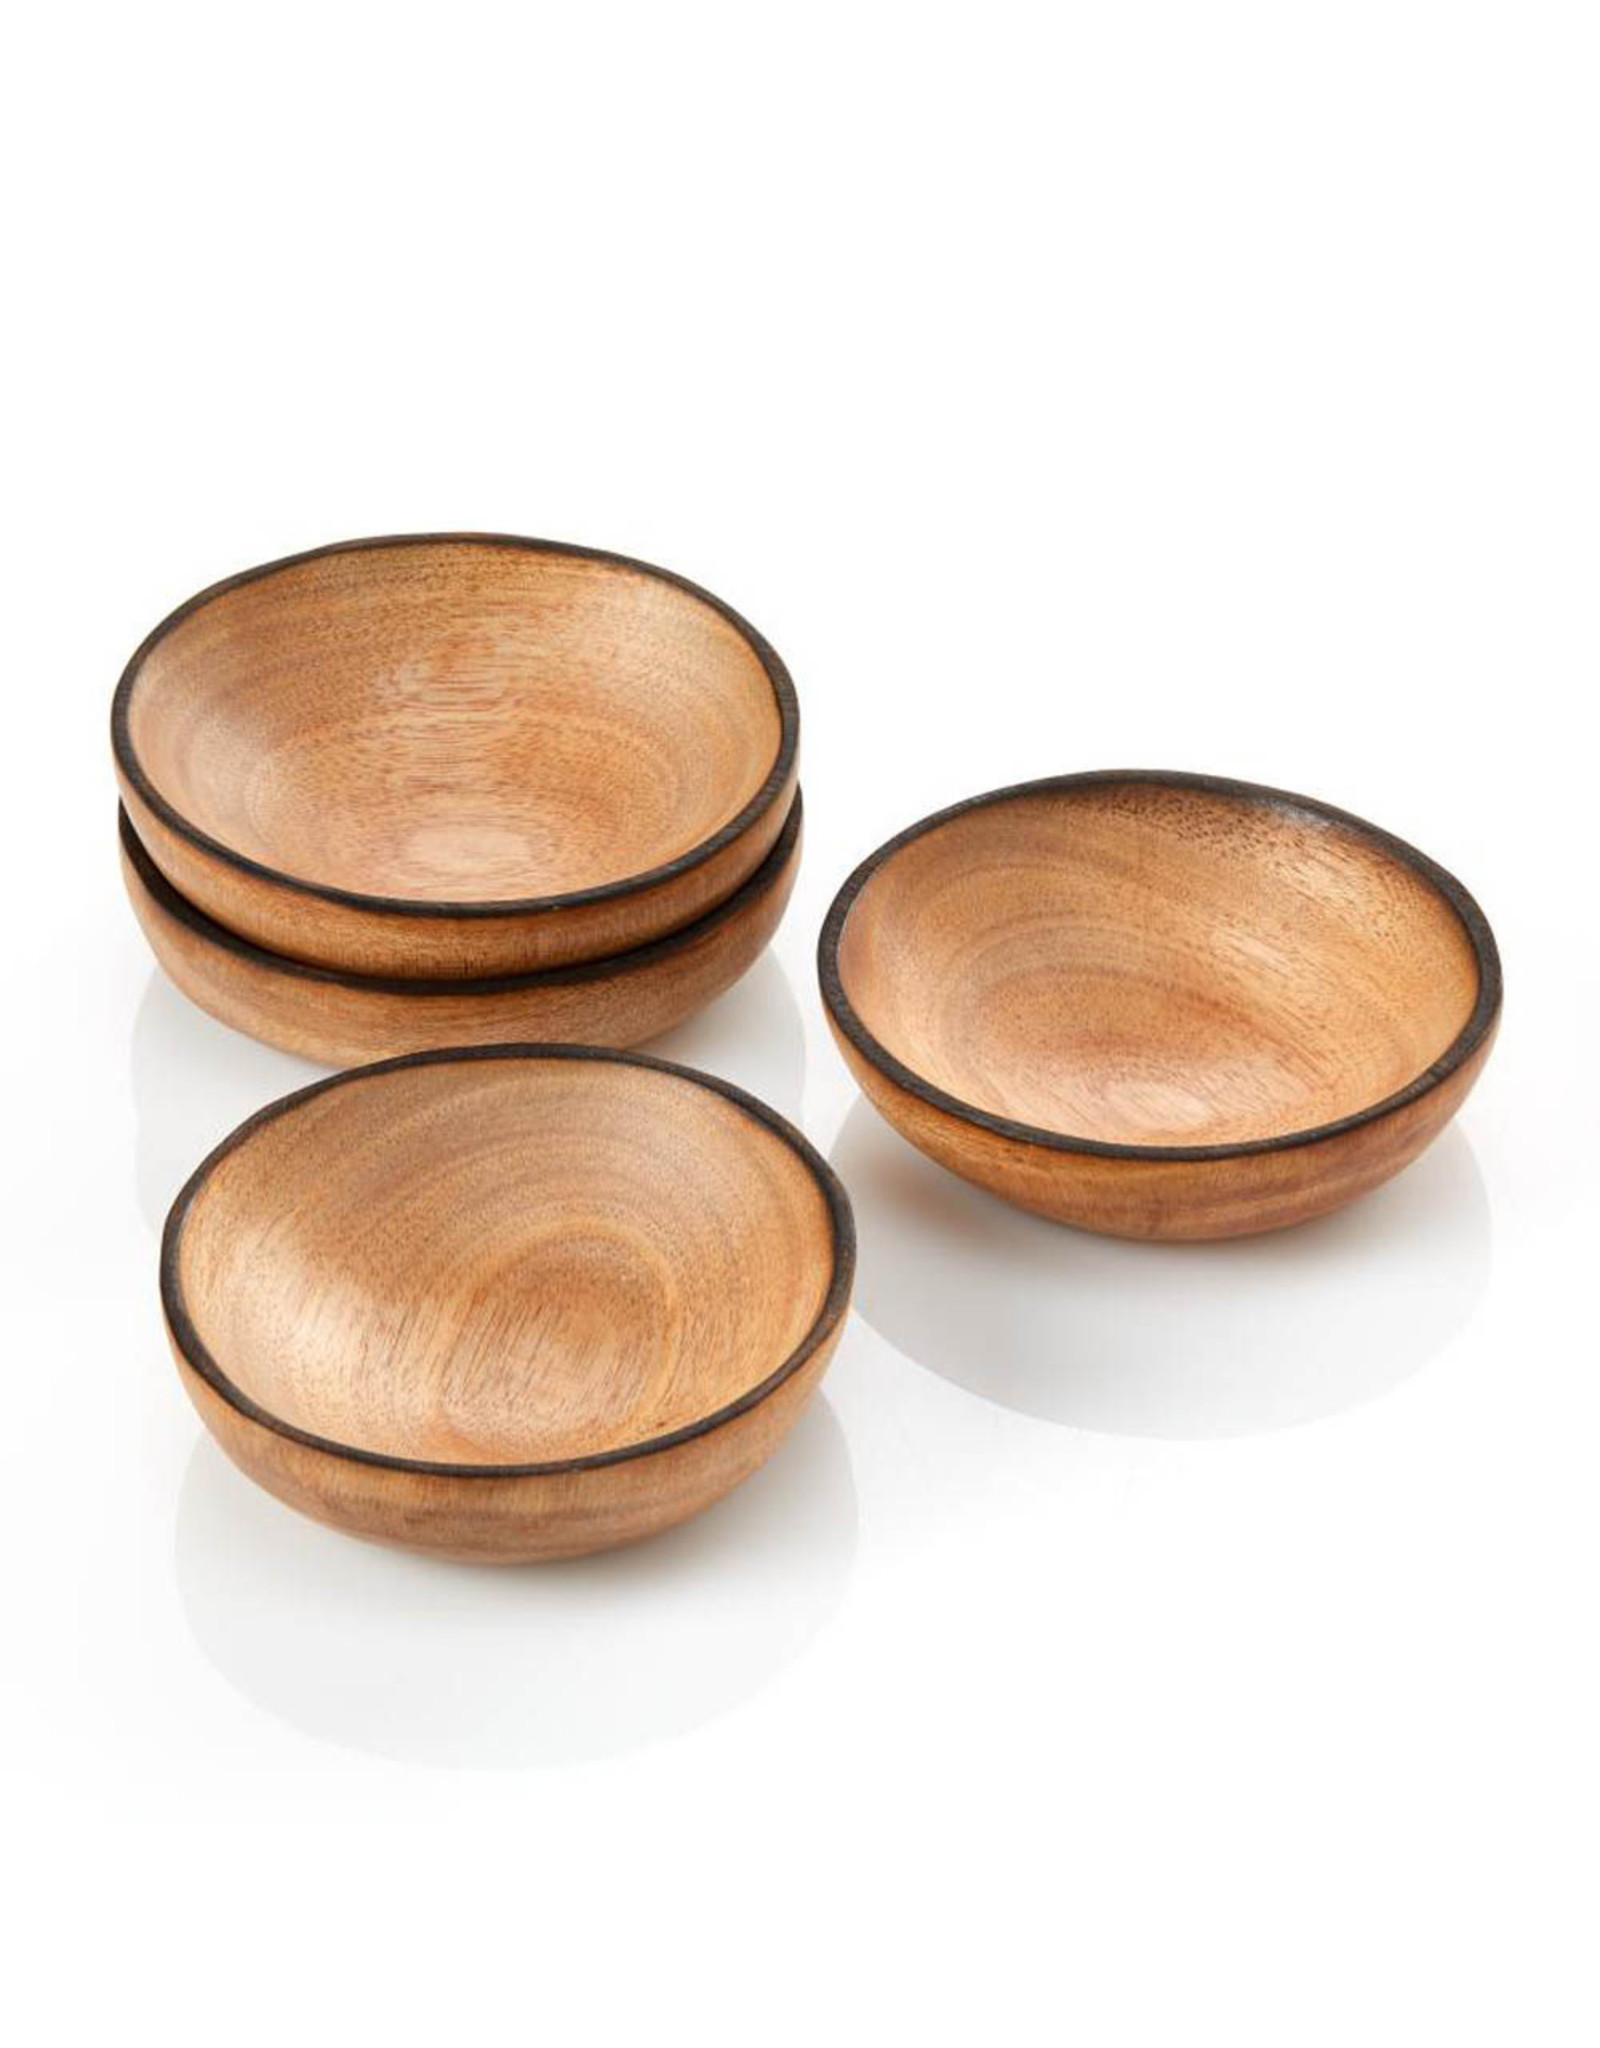 Trade roots Charred Neem Dipping Bowls - Set of 4